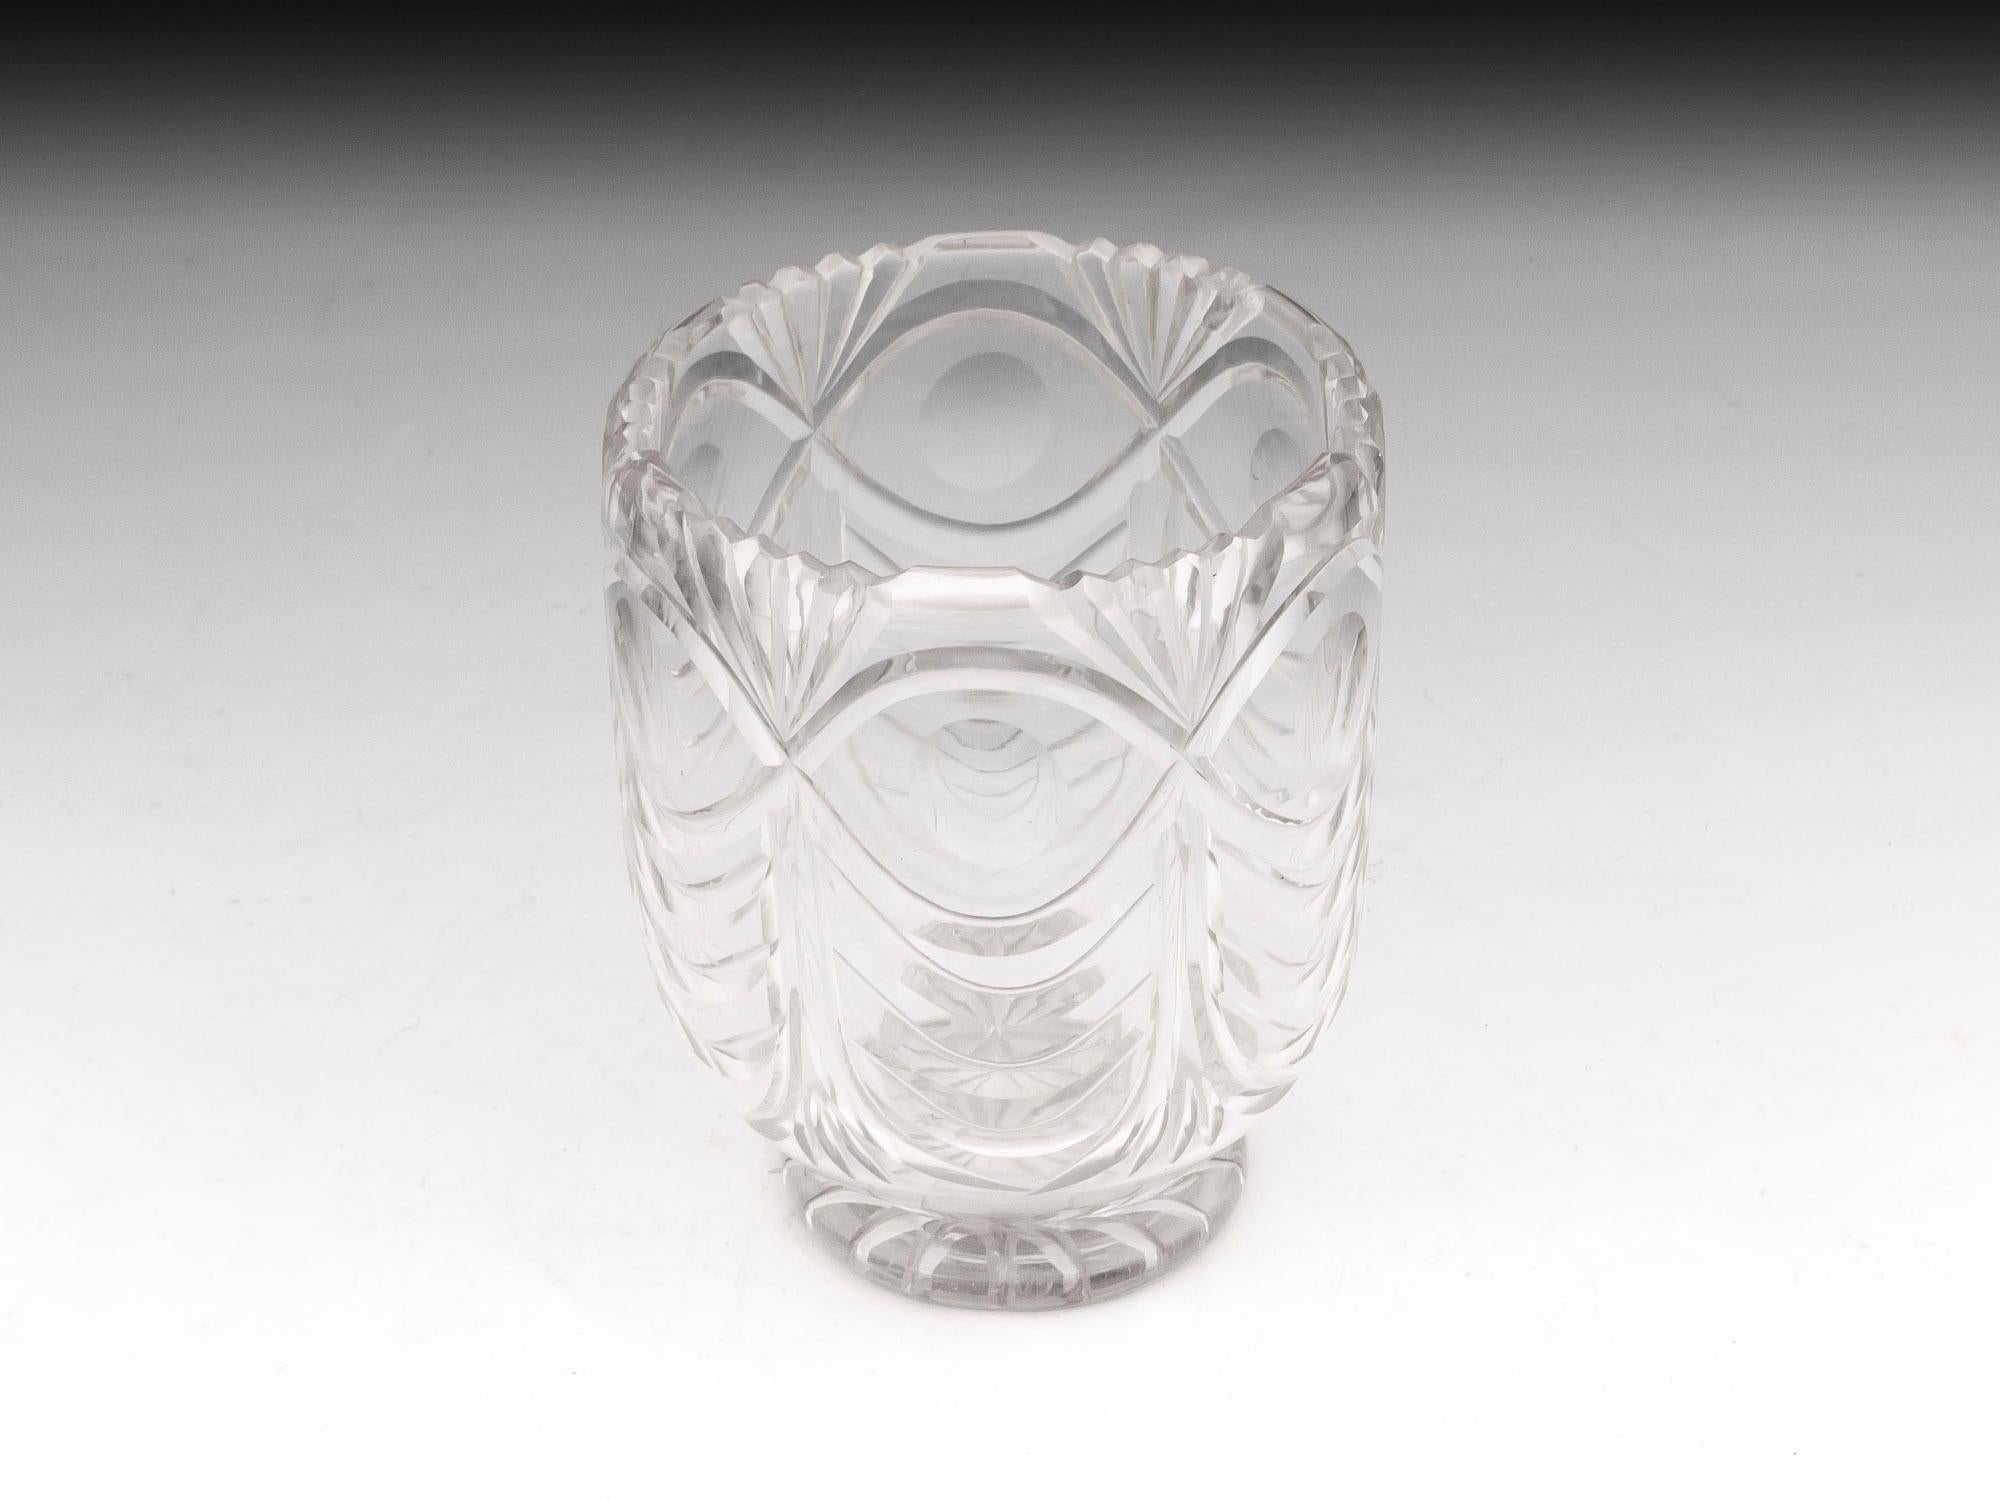 Fabulous thick cut lead crystal tea caddy bowl. With wonderful symmetrical wheel cut designs that look like eyes, with four swags underneath and six equally spaced fan shaped cuts to the top. The foot of the tea caddy bowl has a star cut base.